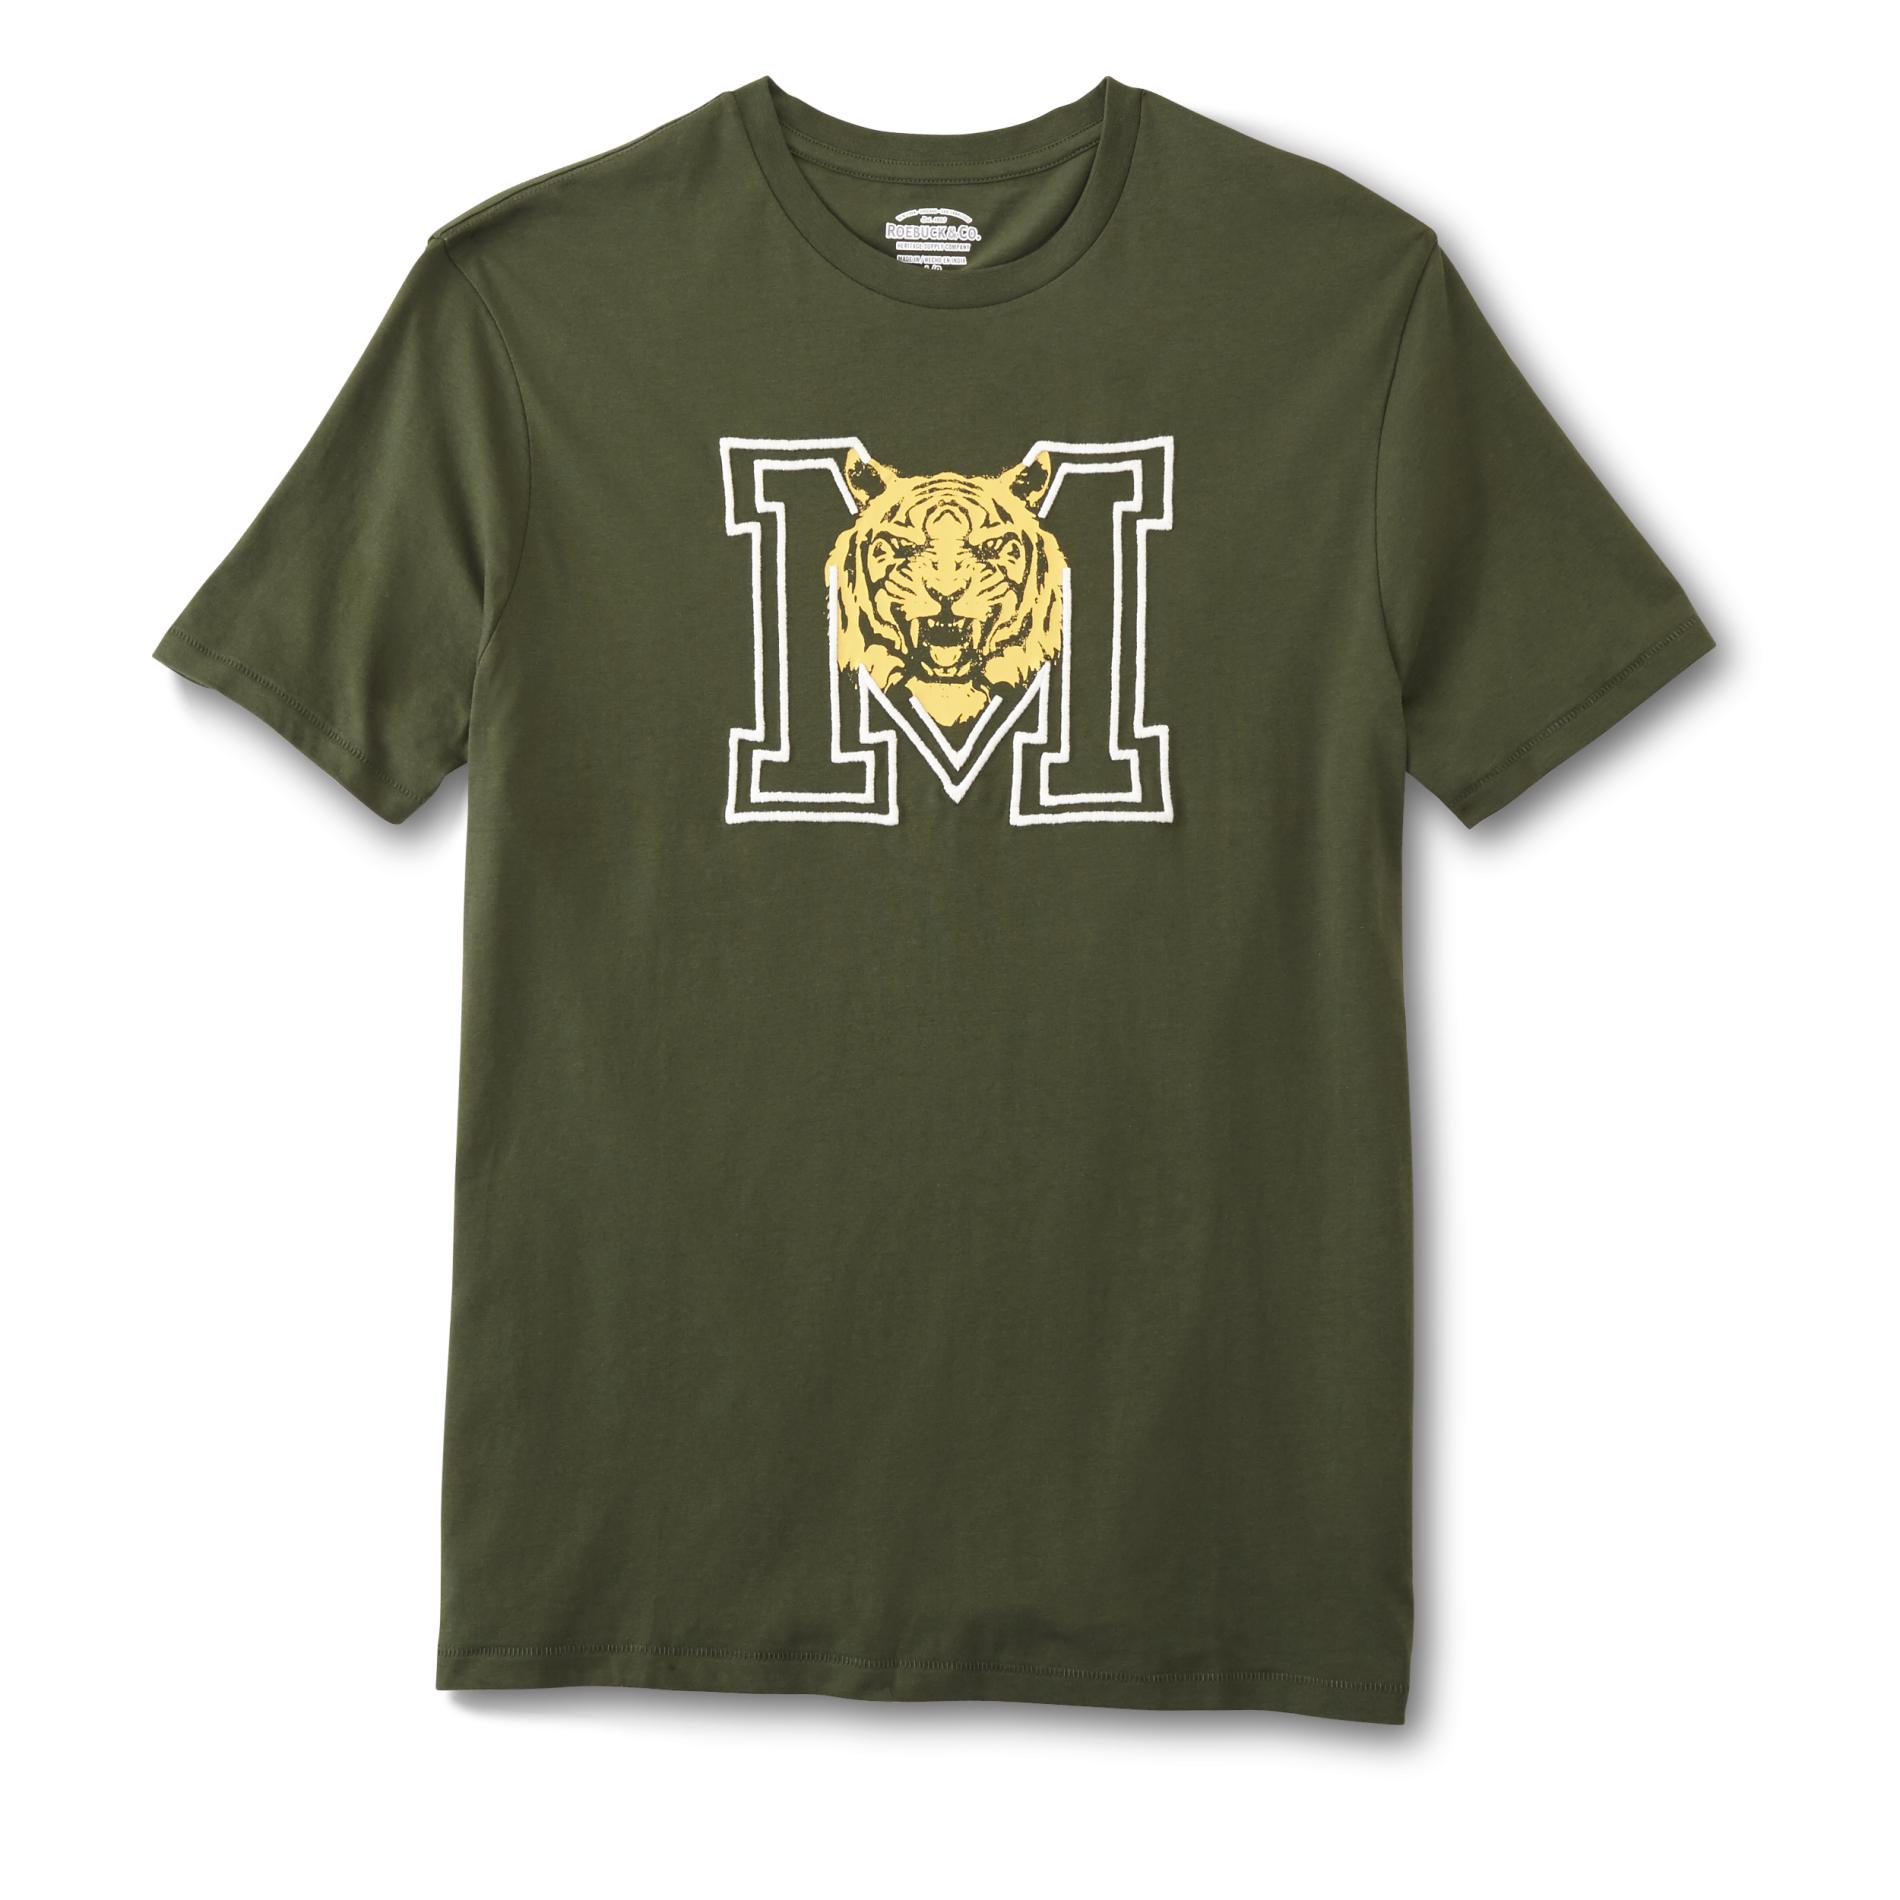 Roebuck & Co. Young Men's Graphic T-Shirt - Tiger